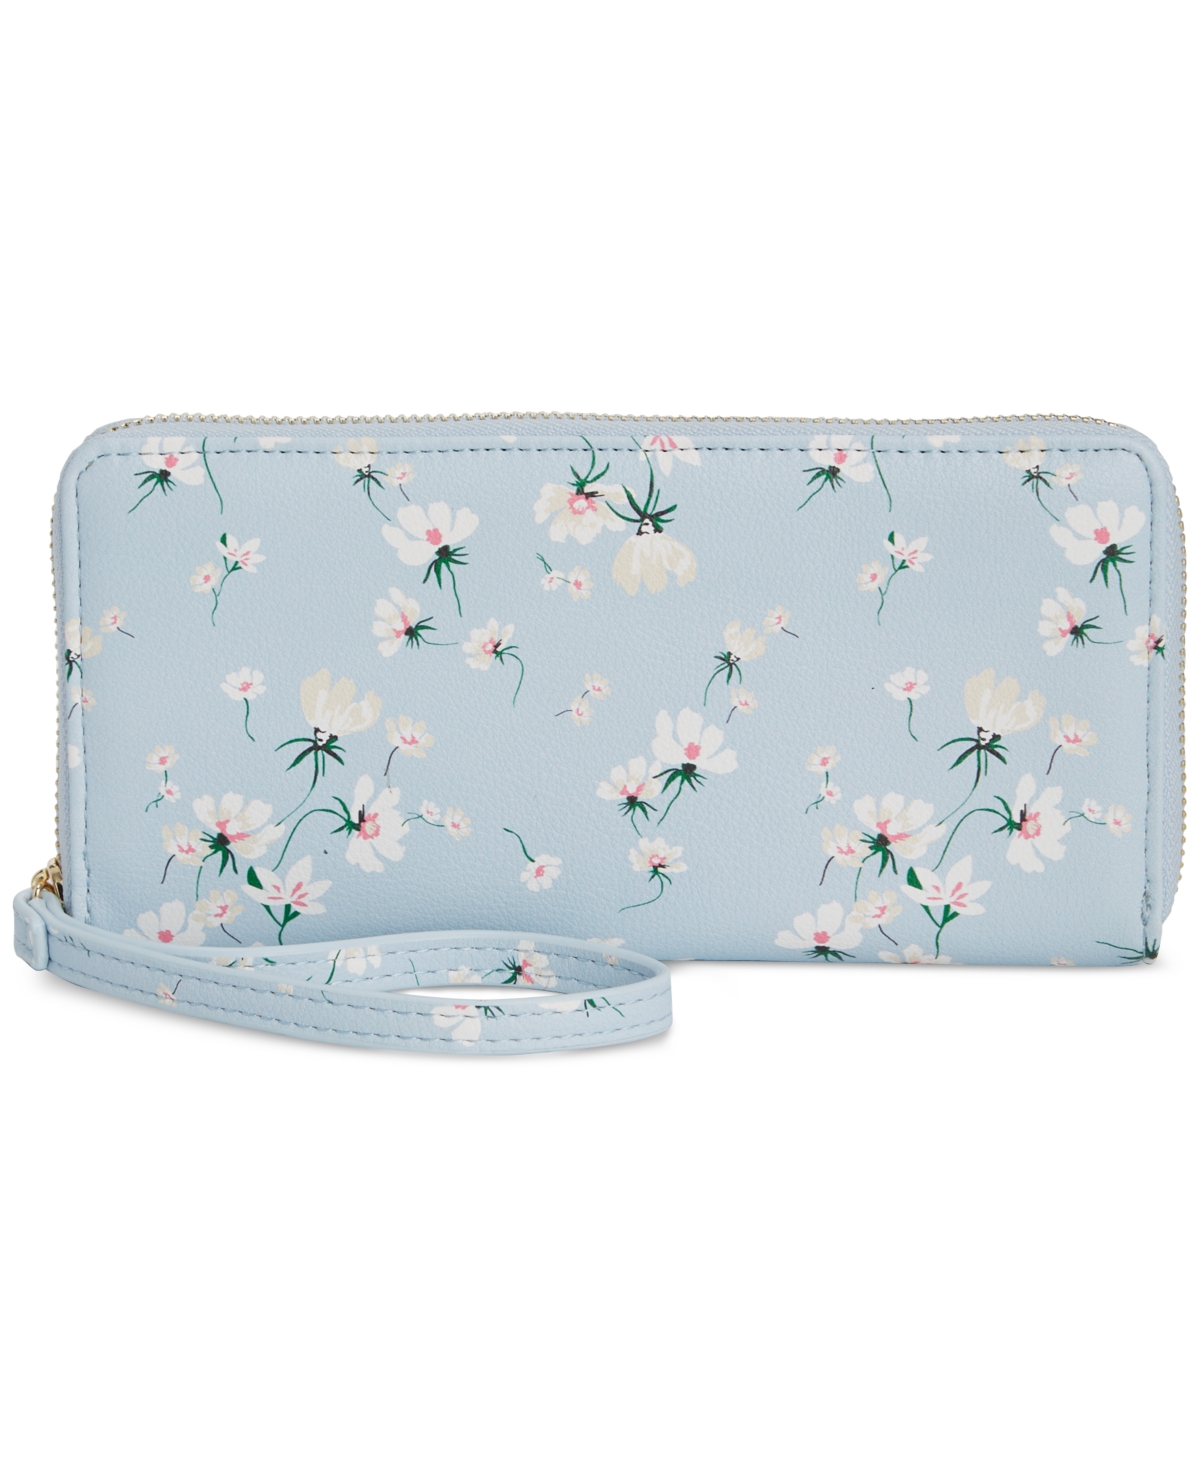 Angii Zip Around Printed Wallet, Created for Macy's - Cheerful Flower